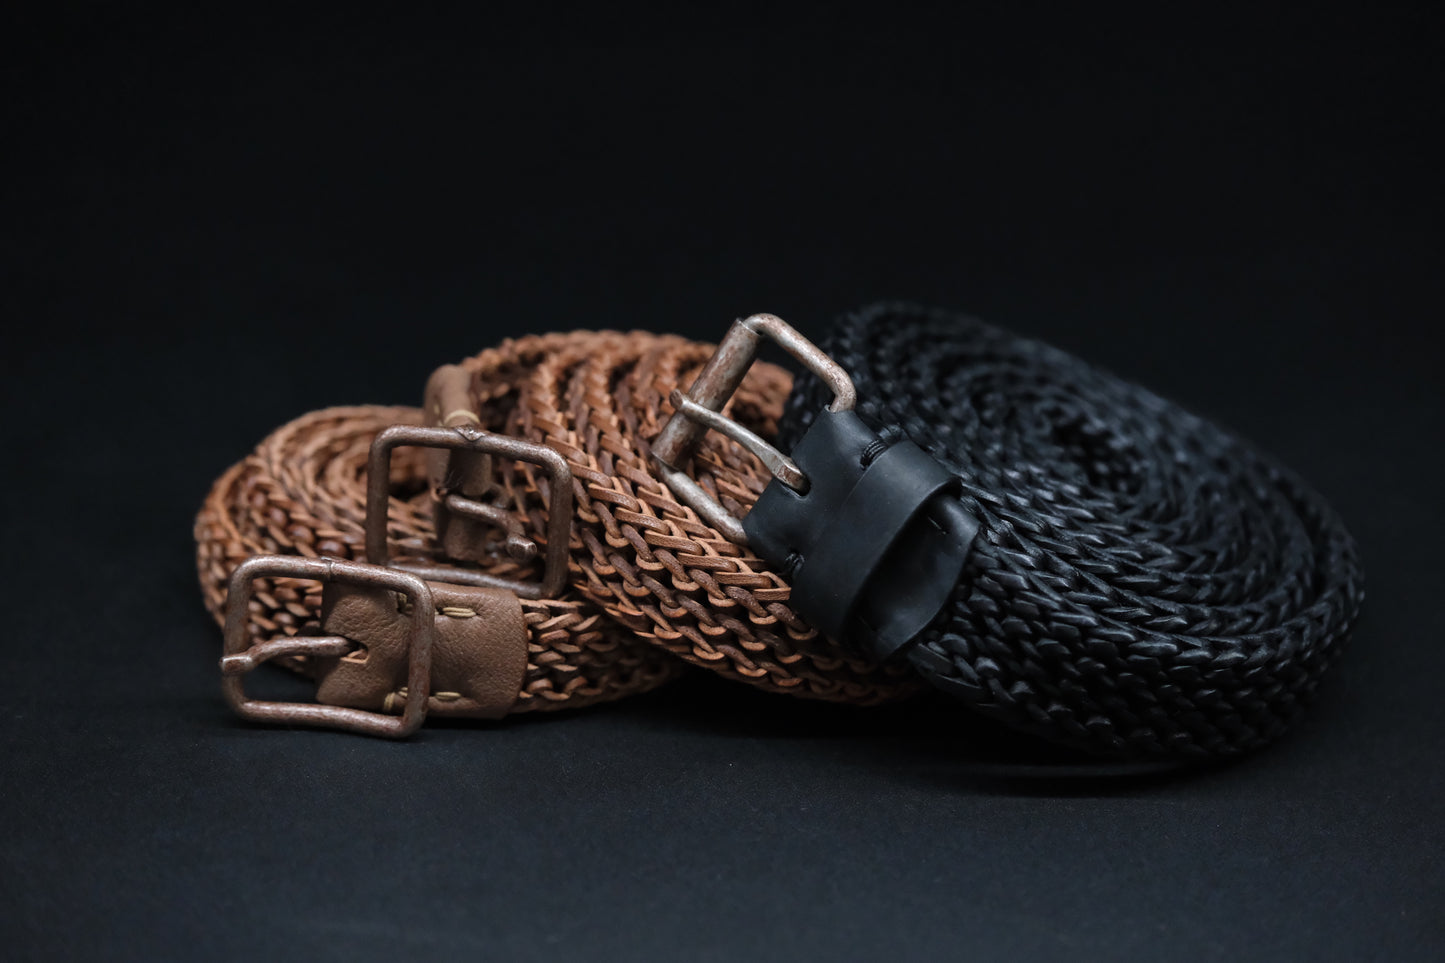 Womb Leather / Hand Knitted Leather Belt / Camel